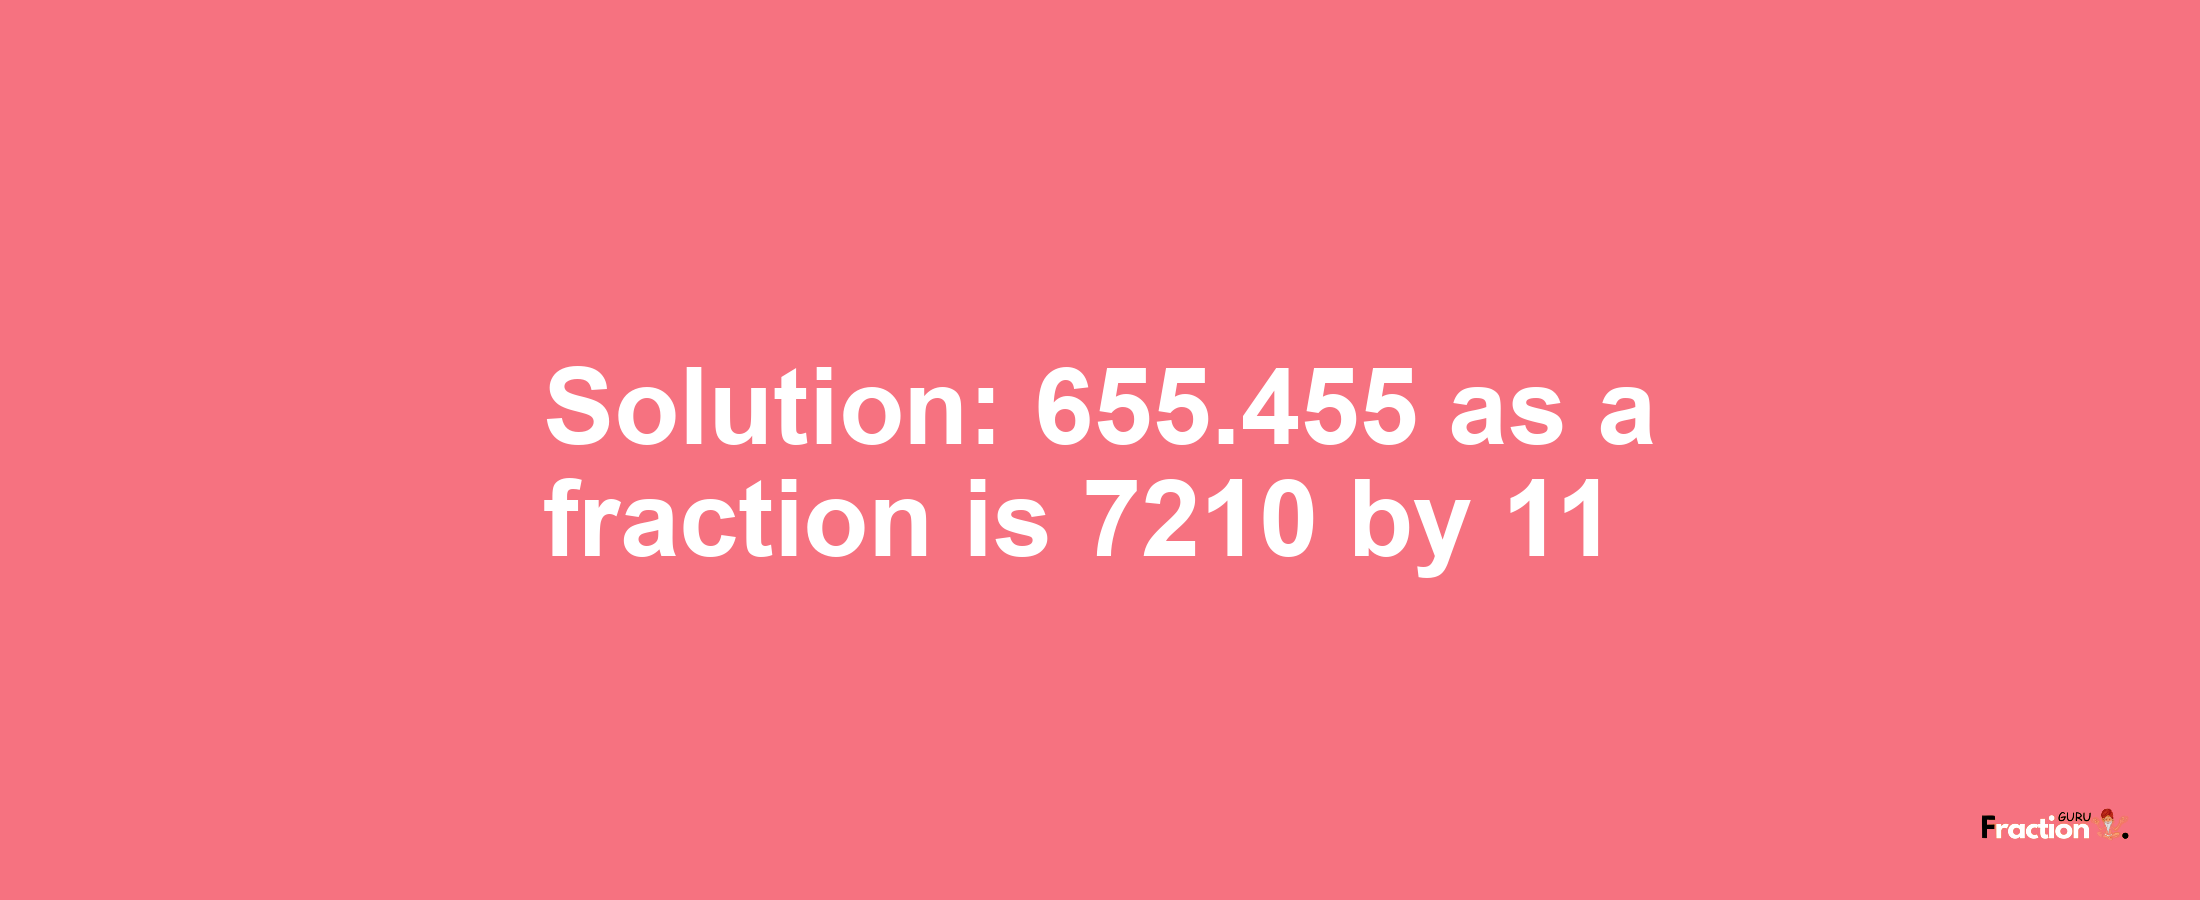 Solution:655.455 as a fraction is 7210/11